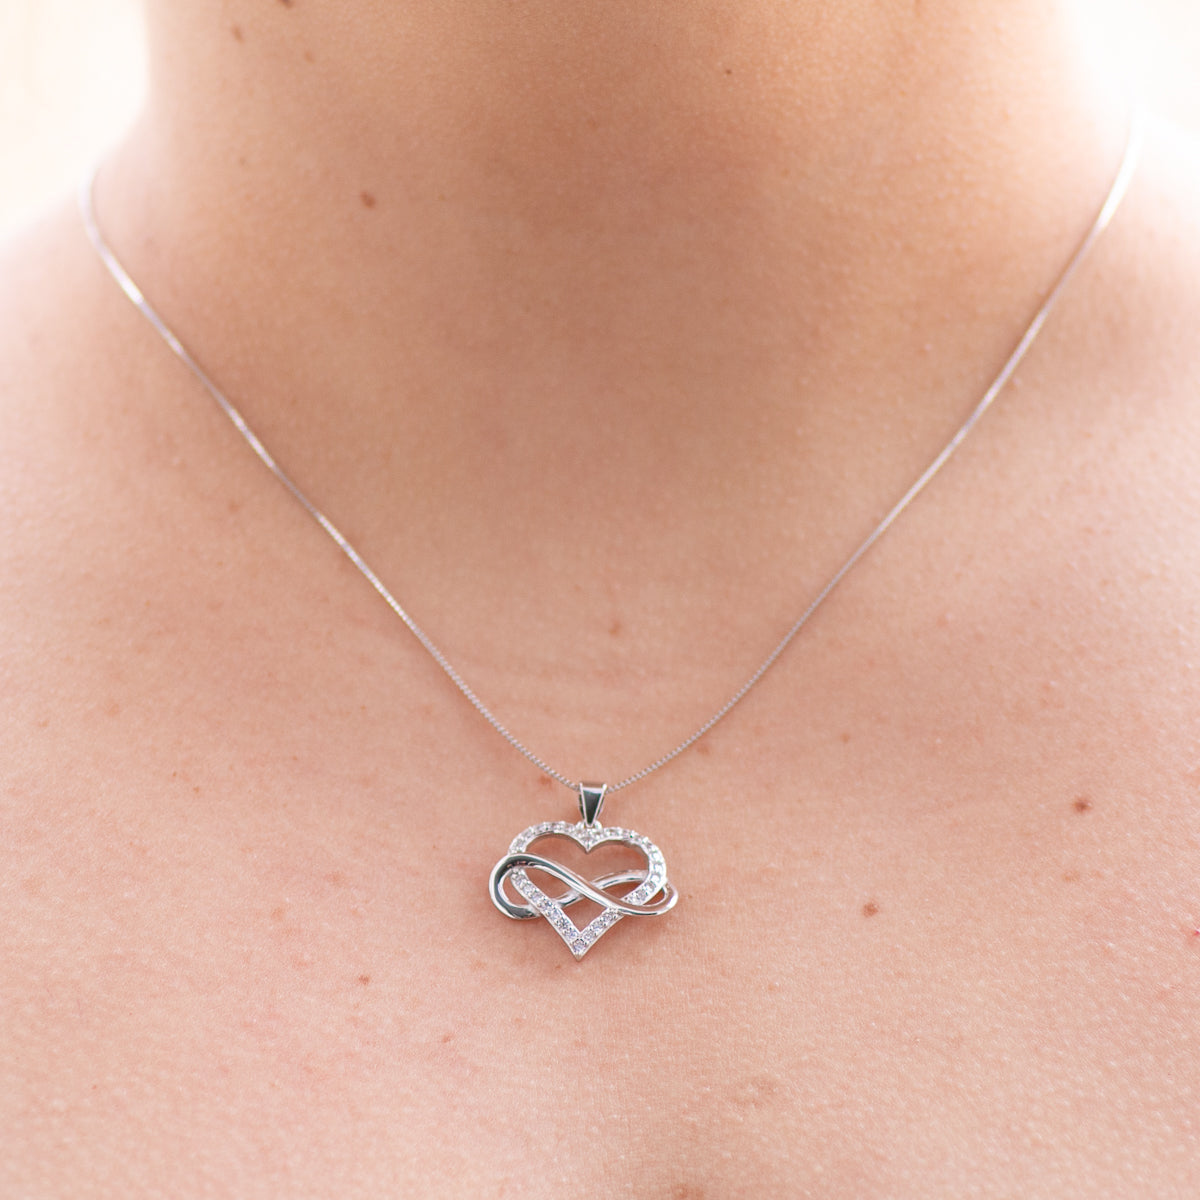 The Day I Met You Infinity Heart Silver Necklace - Wife